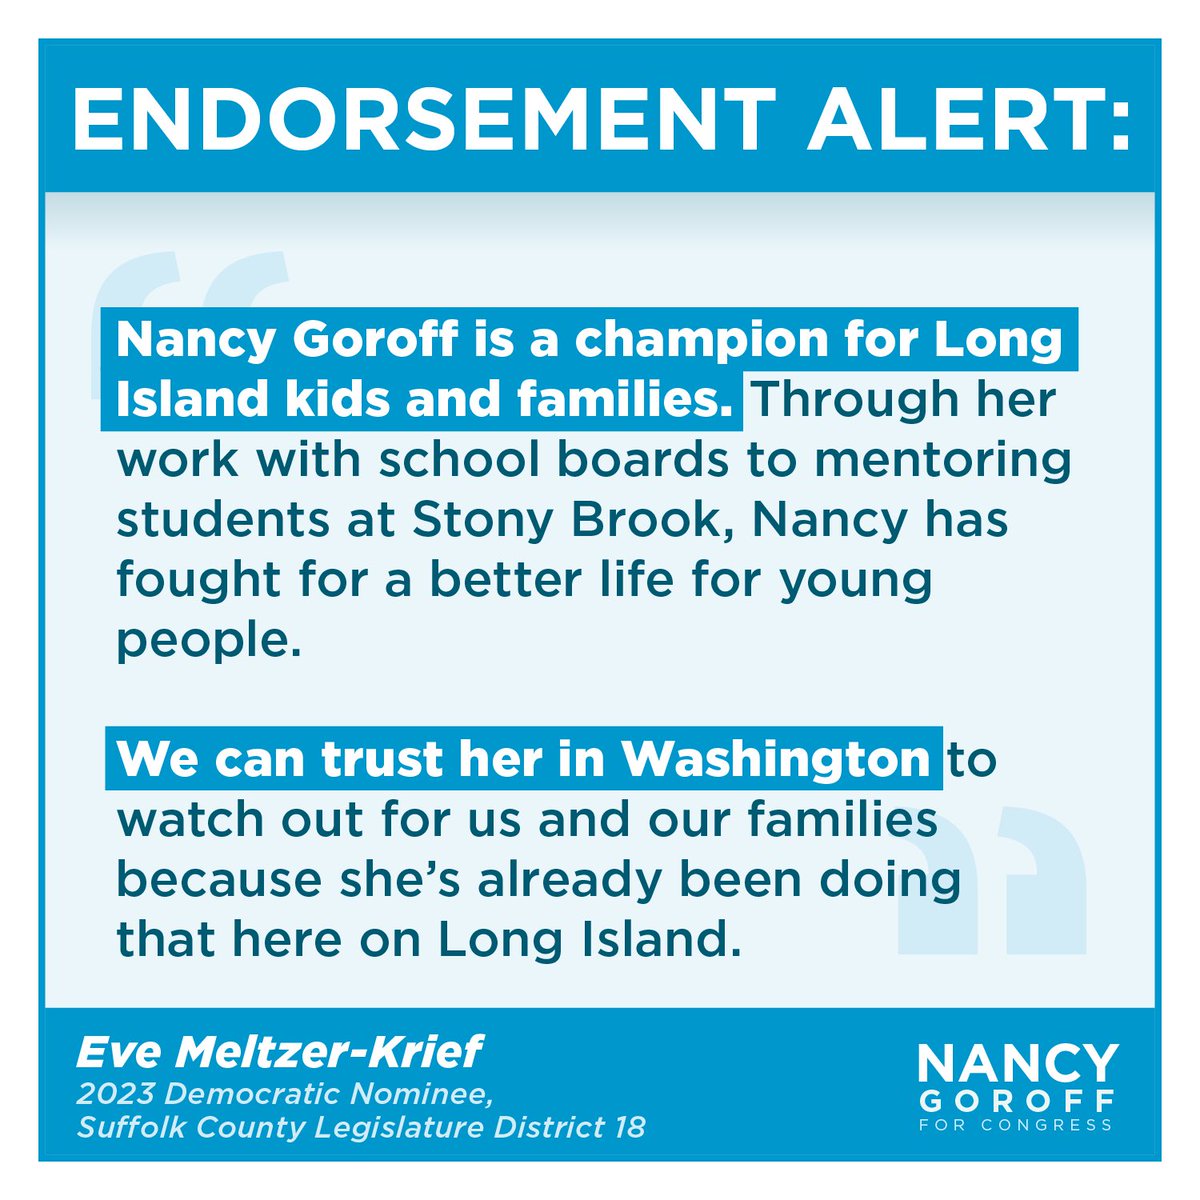 Eve is an amazing advocate for kids and all of Huntington. I’m incredibly honored to have her support.